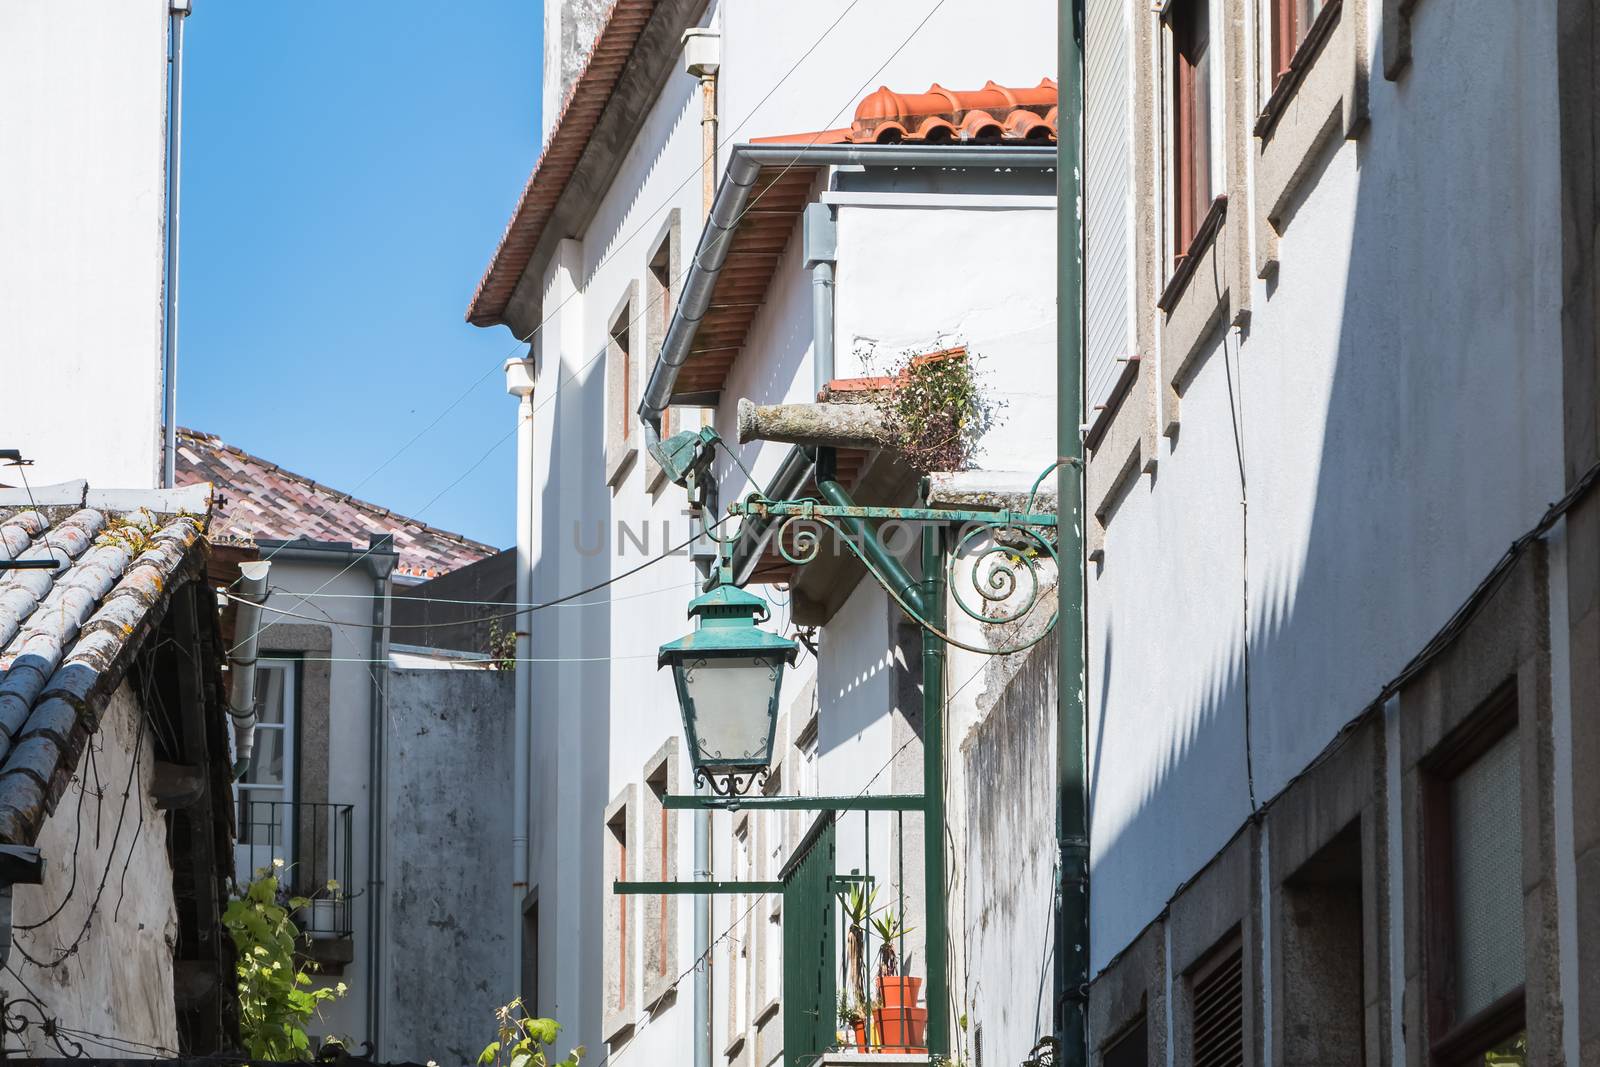 Viana Do Castelo, Portugal, Portugal - May 10, 2018: Architecture detail of typical houses and shops in the streets of the historic city center that tourists visit on a spring day